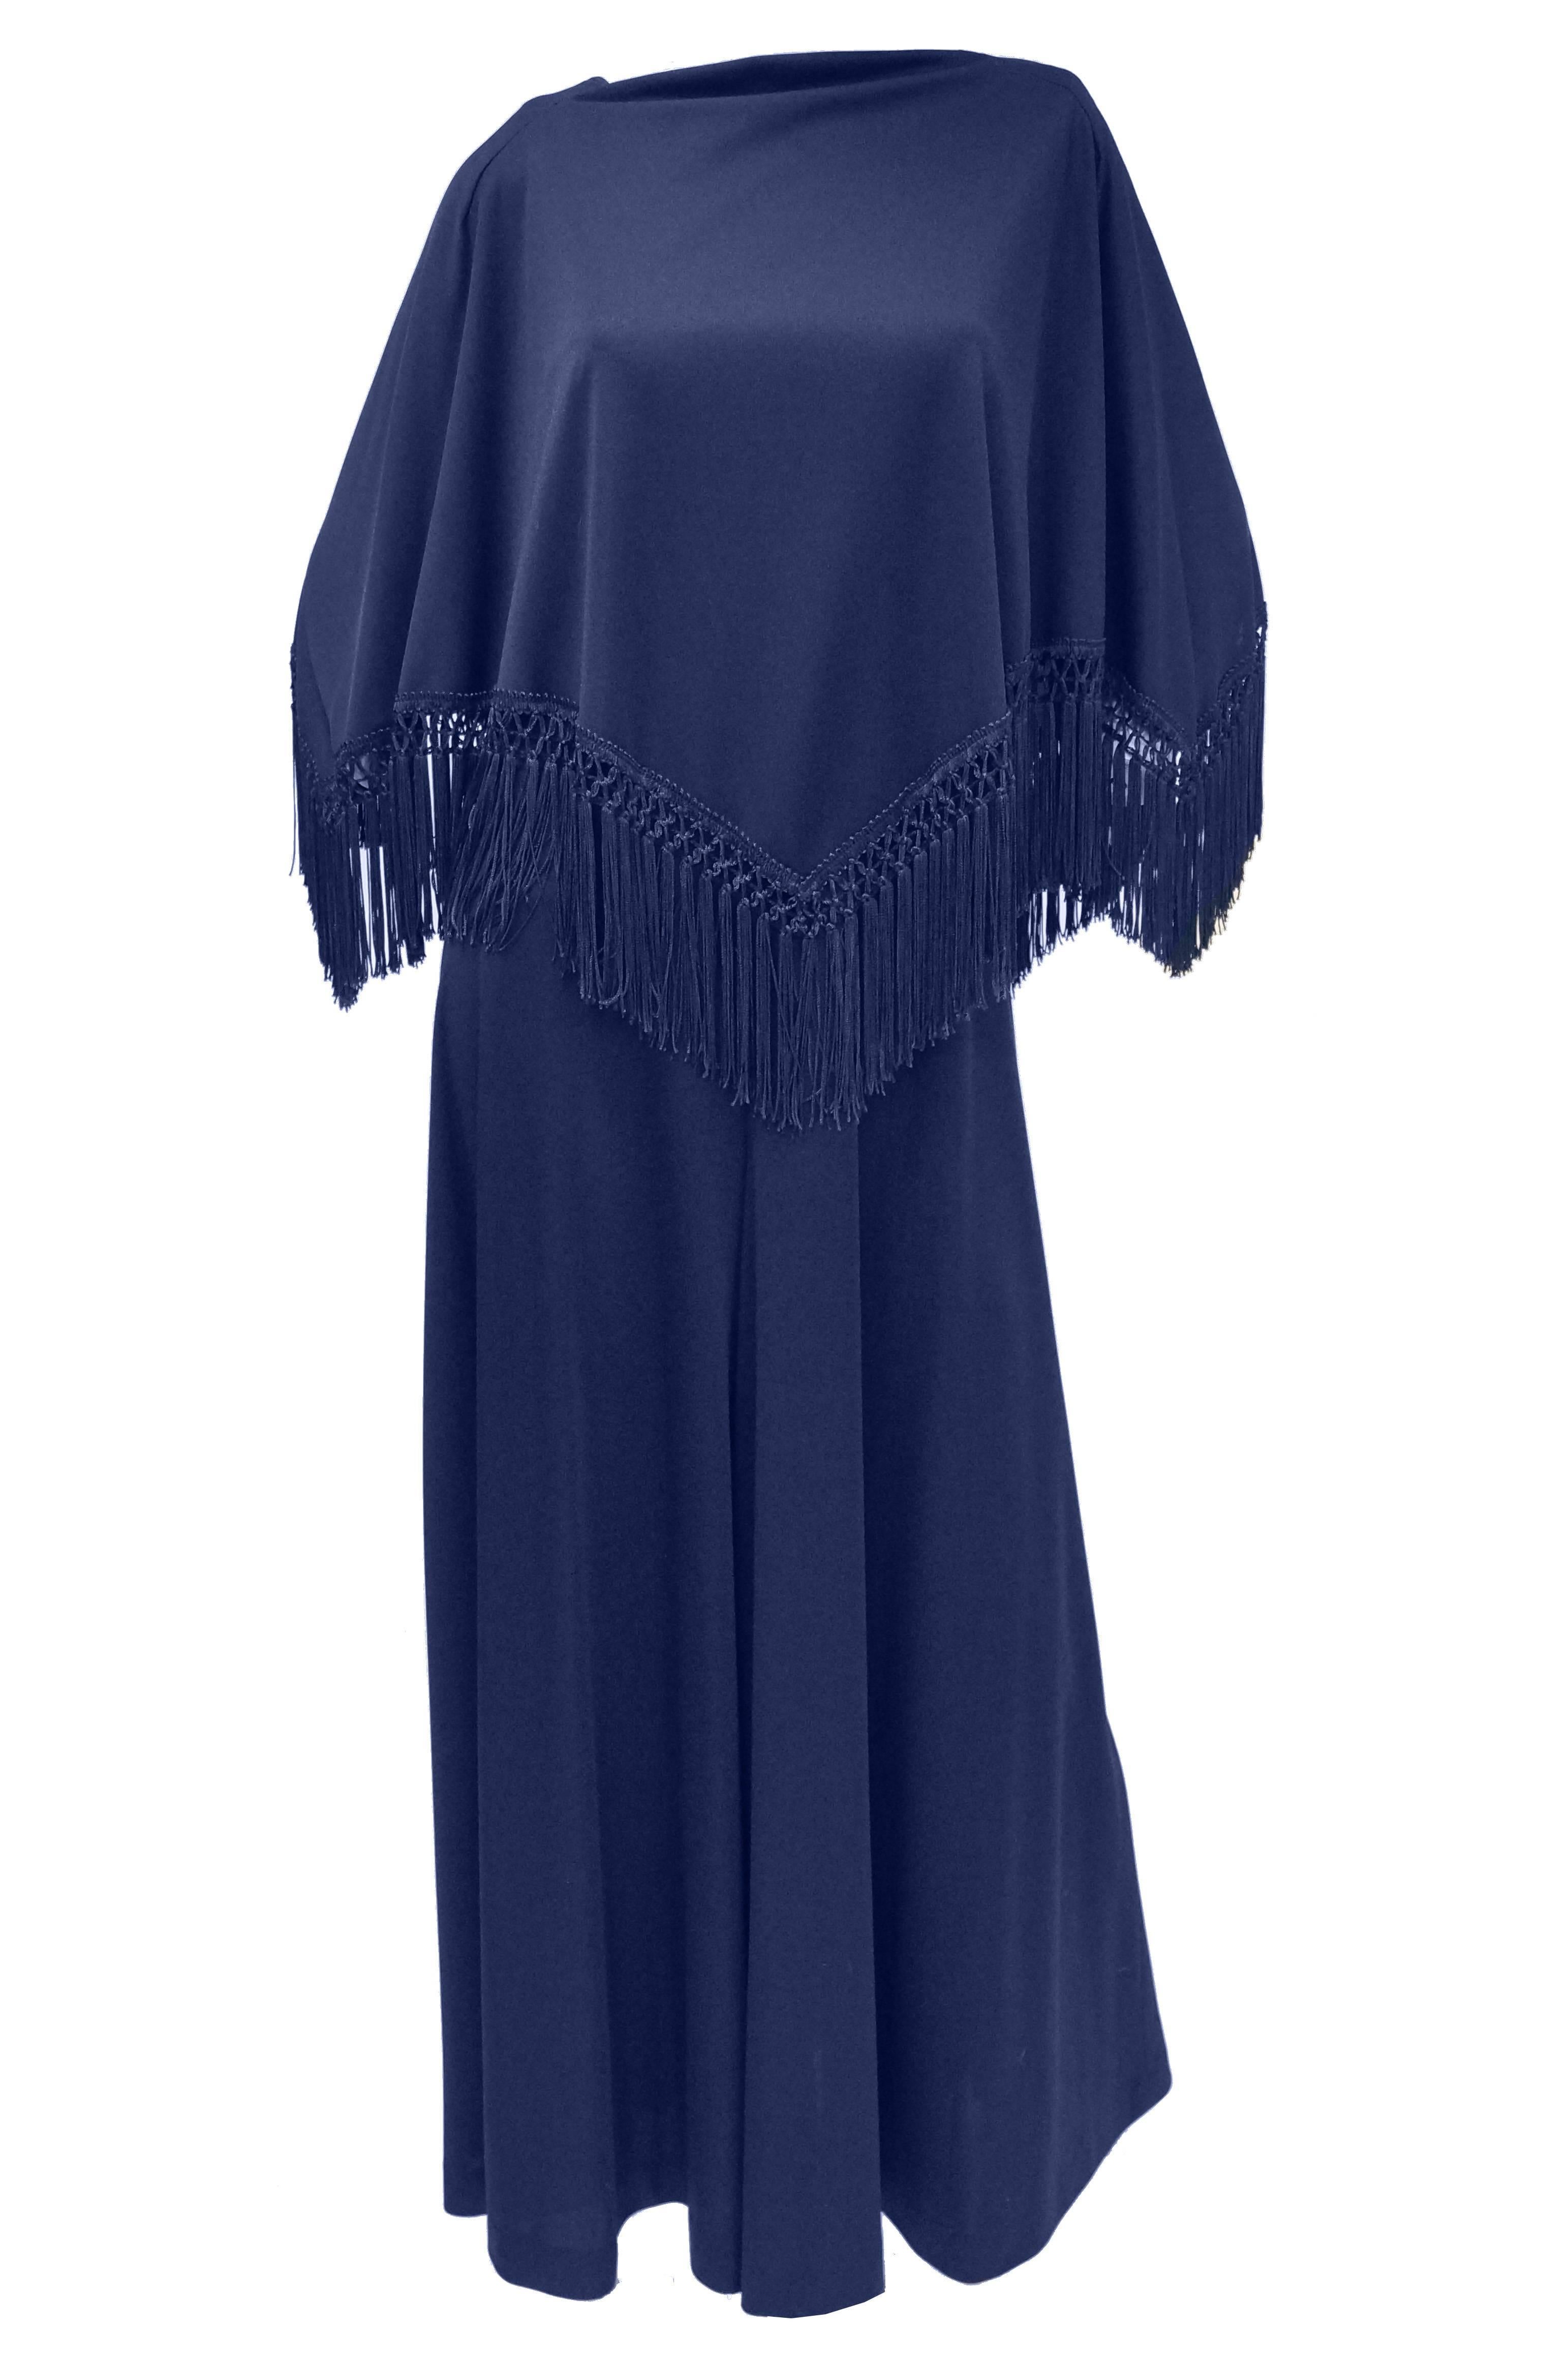 Deep indigo jumpsuit with fabulous shawl top! The jumpsuit features a loose silhouette 
layered under a shawl. The jumpsuit is sleeveless with a jewel neckline, and has voluminous floor length palazzo pants that sway gently when walking. The most